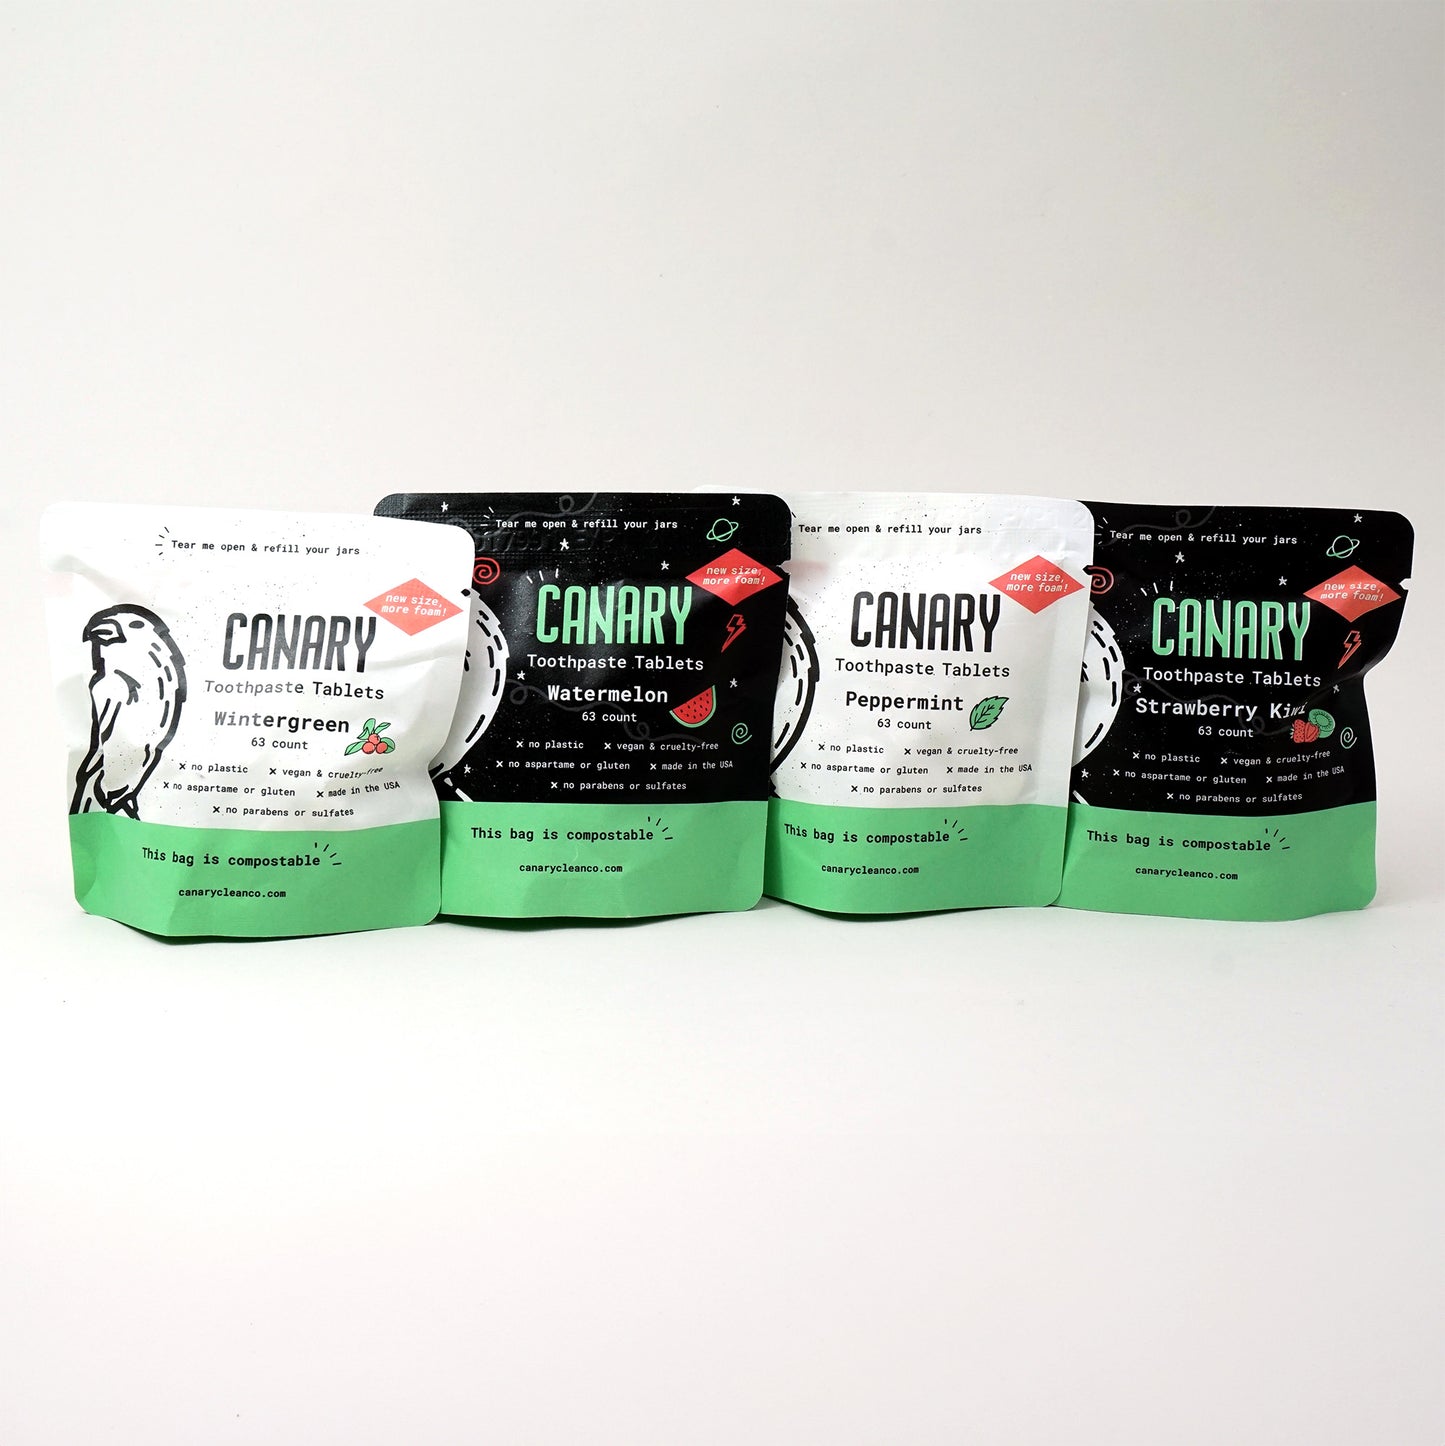 4 pack bundle of all four flavors in the new and improved formula, 63 count sample pouches. Peppermint, Wintergreen, Watermelon and Strawberry Kiwi toothpaste tablets